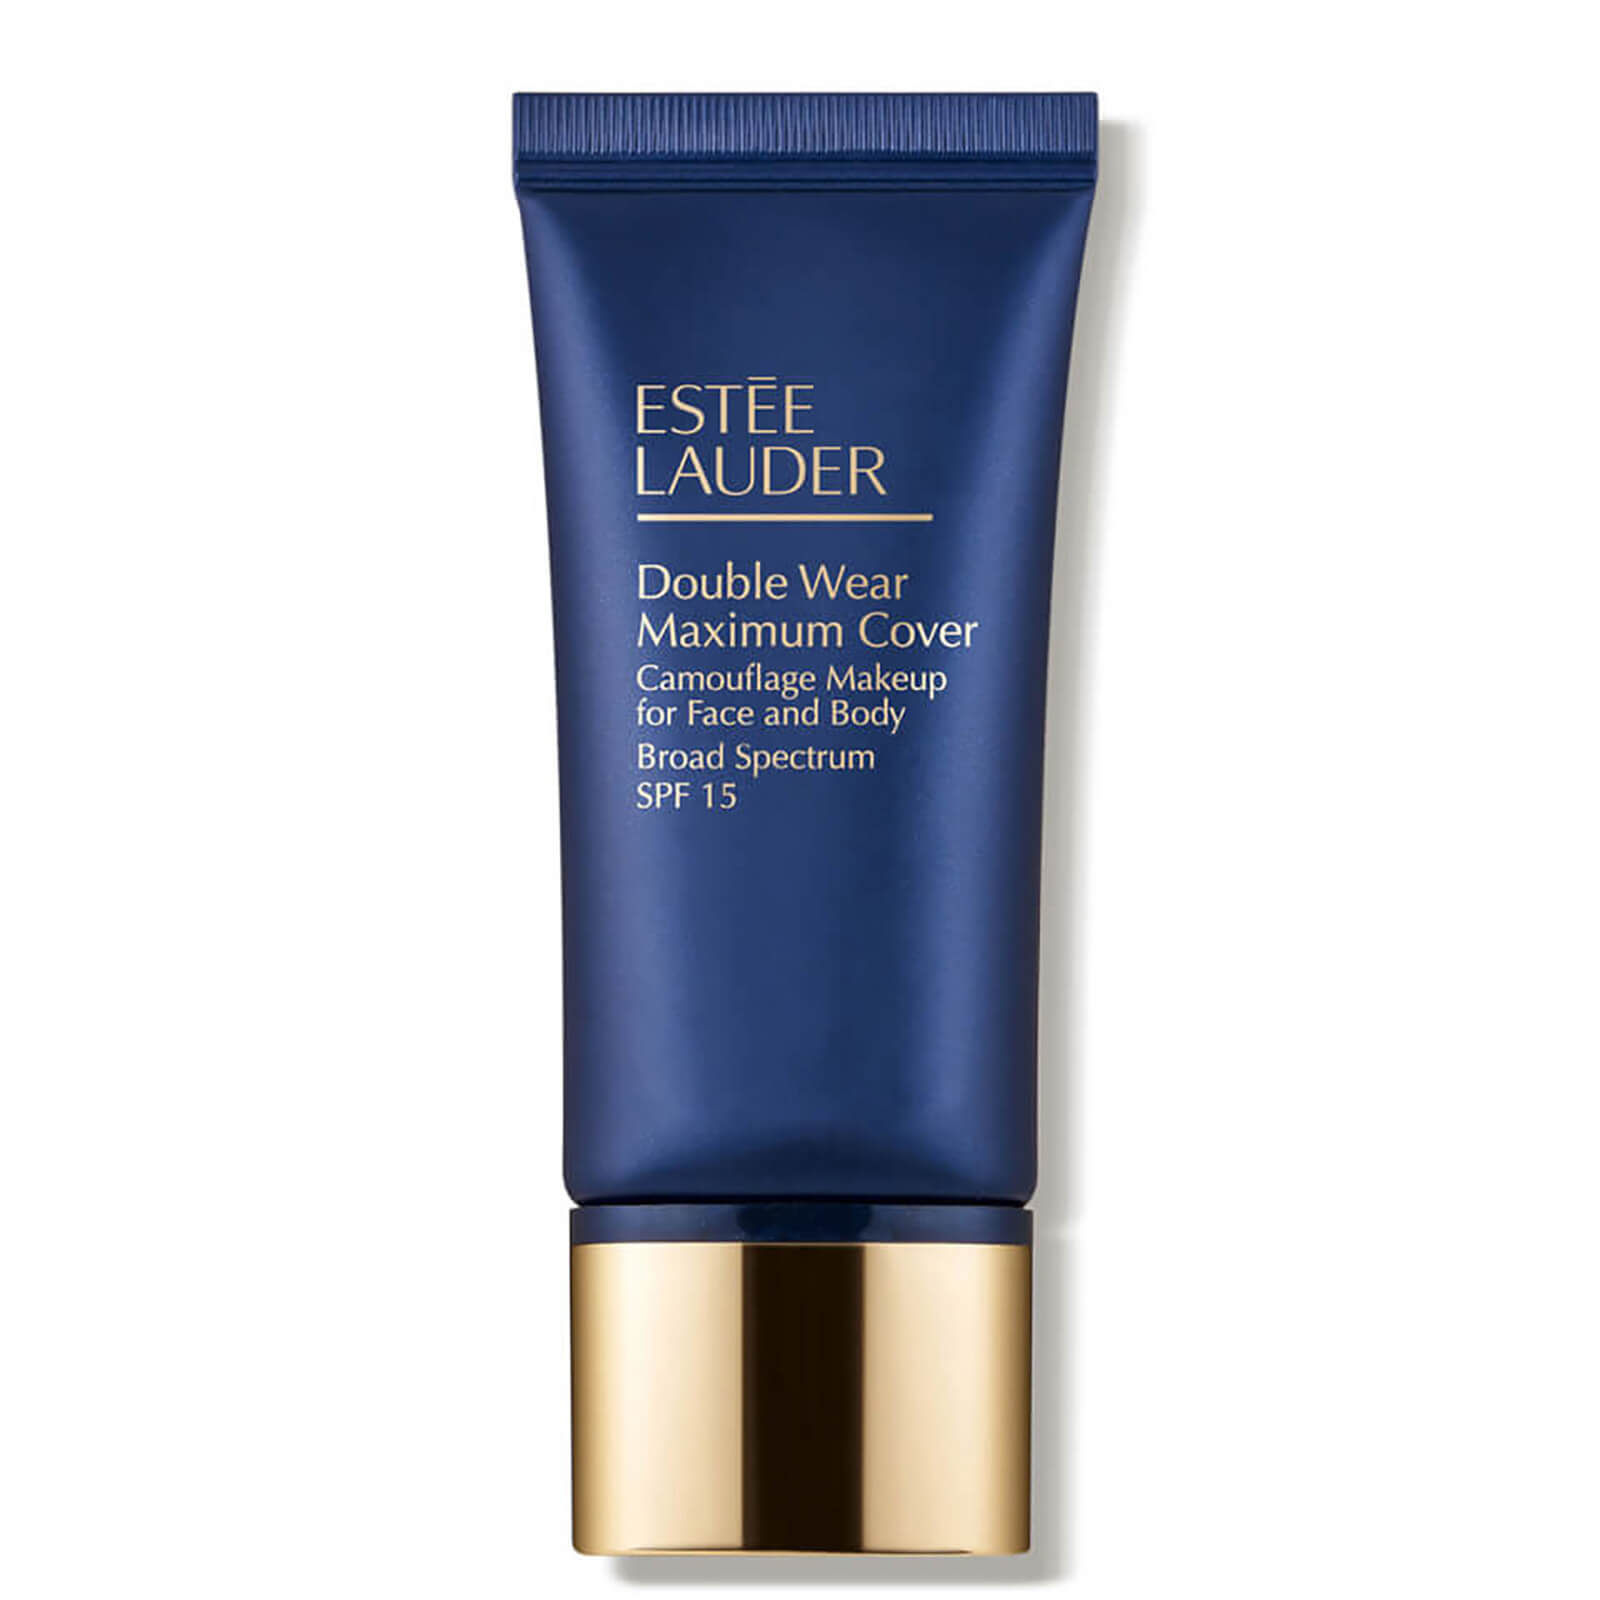 Estée Lauder Double Wear Maximum Cover Camouflage Makeup For Face And Body Spf 15 (1 Oz.) In 4w1 Honey Bronze